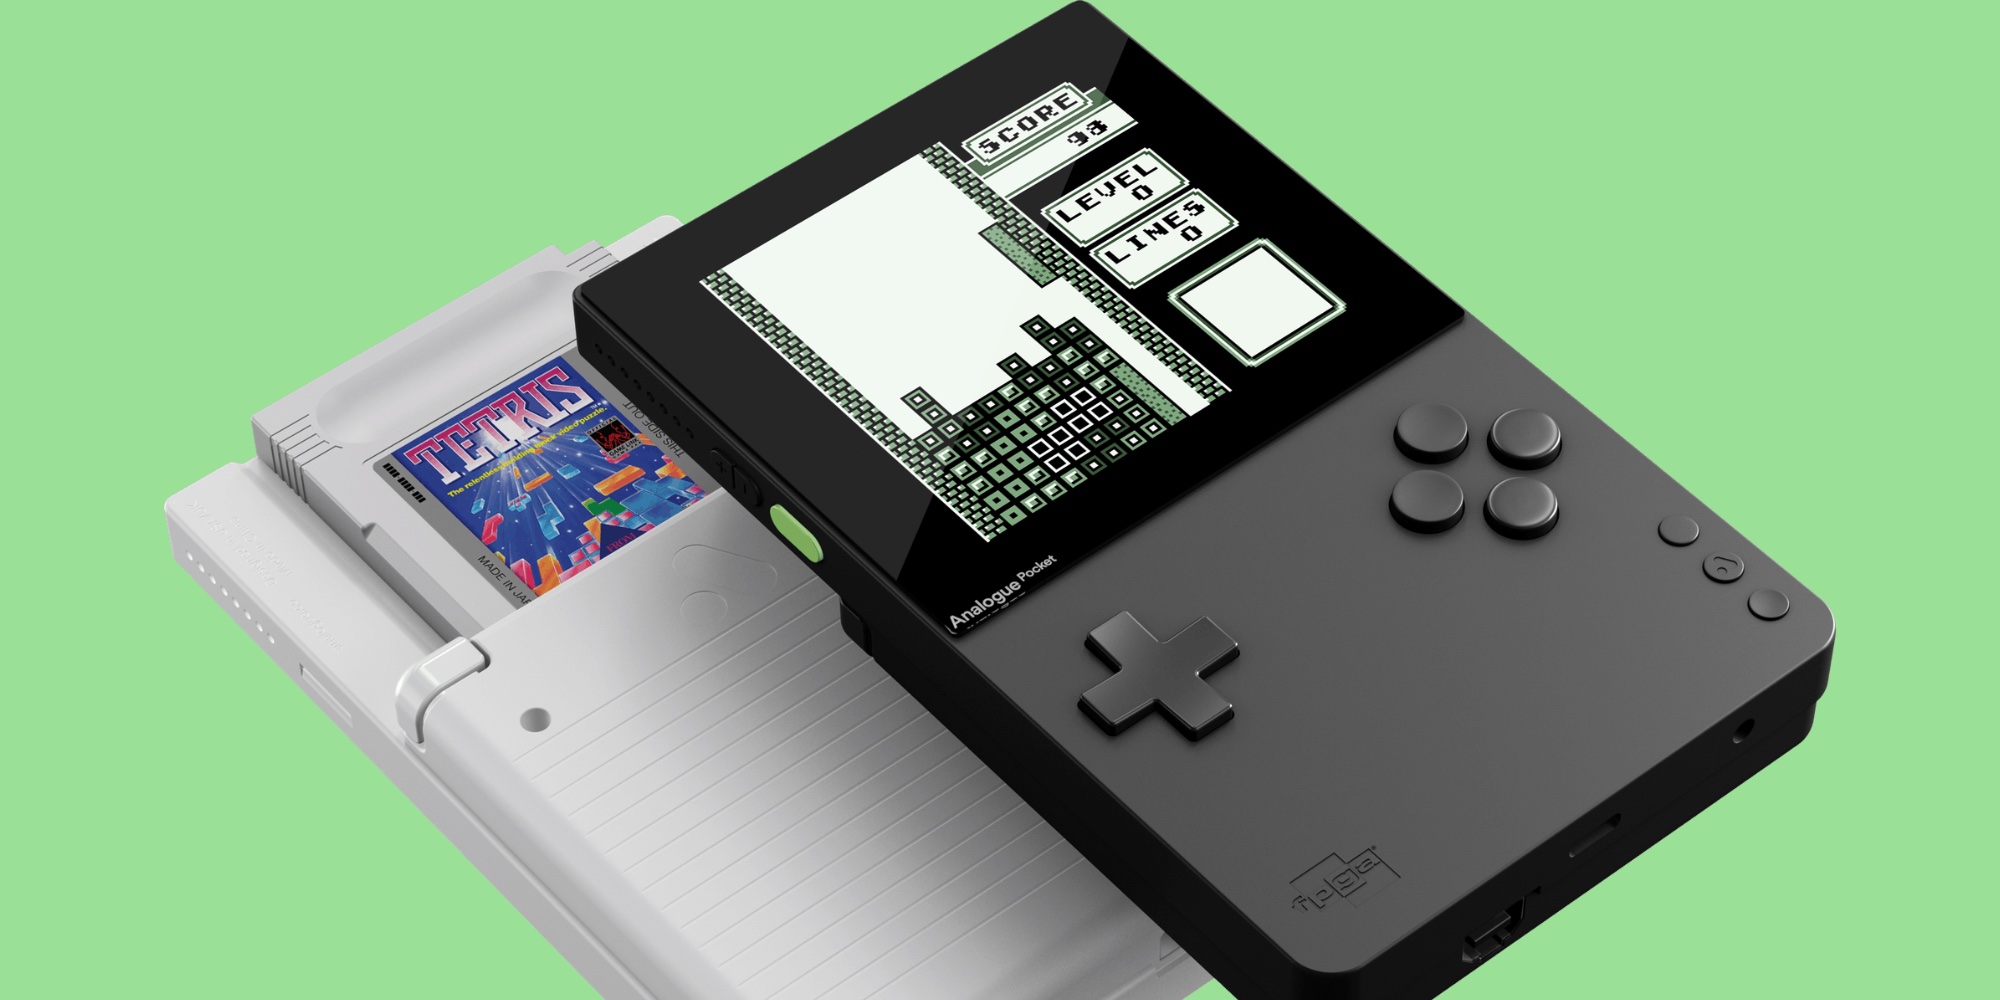 Analogue Pocket debuts as a new way to play old GameBoy alts